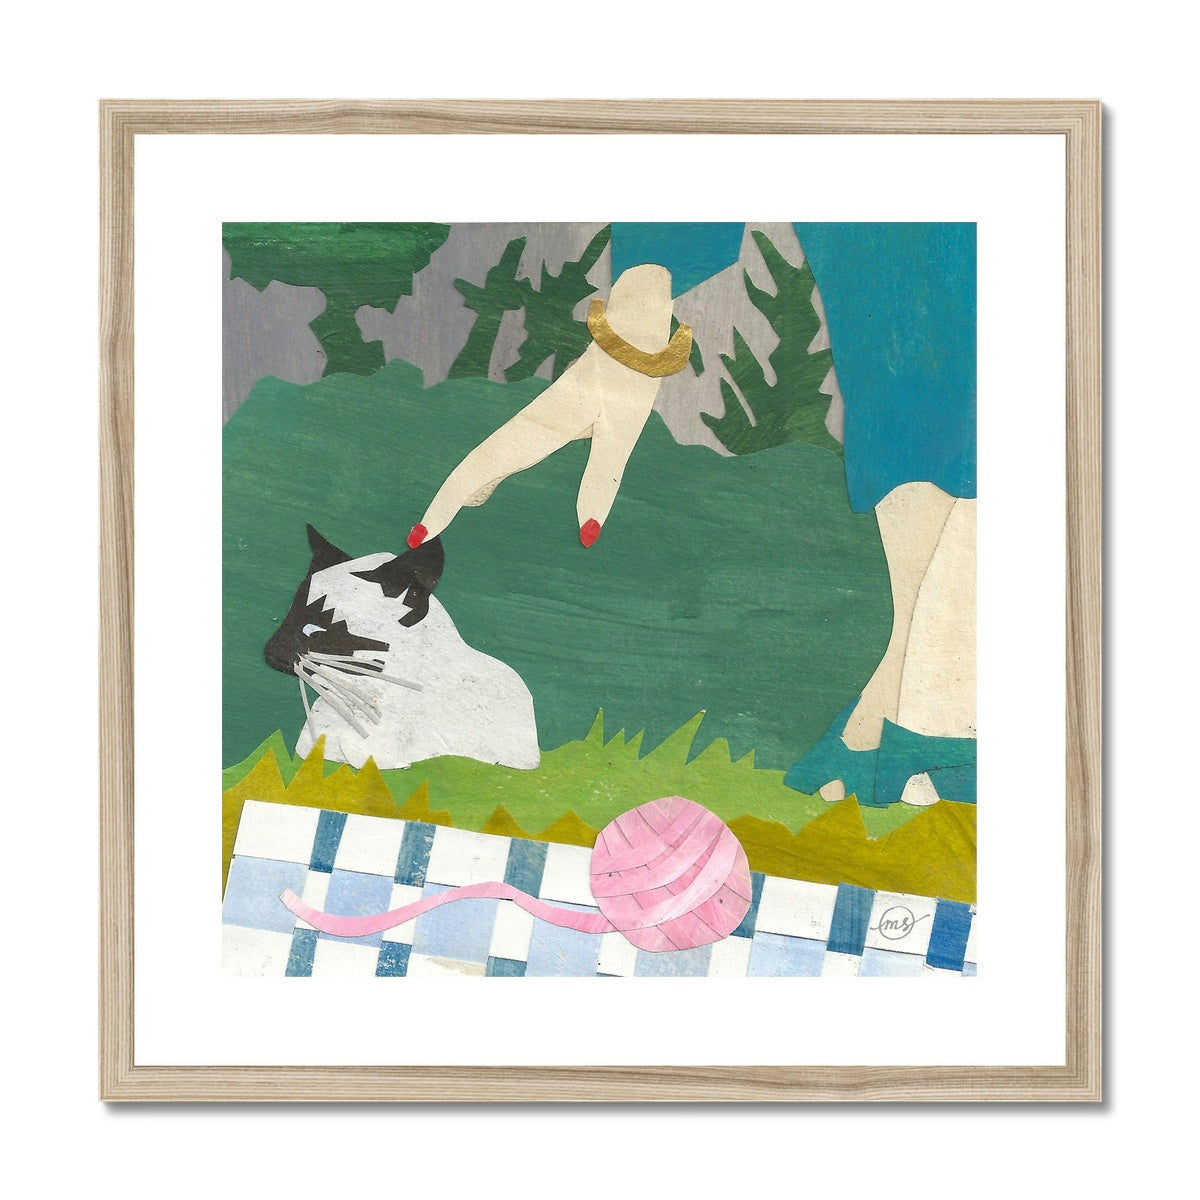 Picnic with Virginia Woolf's Cat 1947 Framed & Matted Print